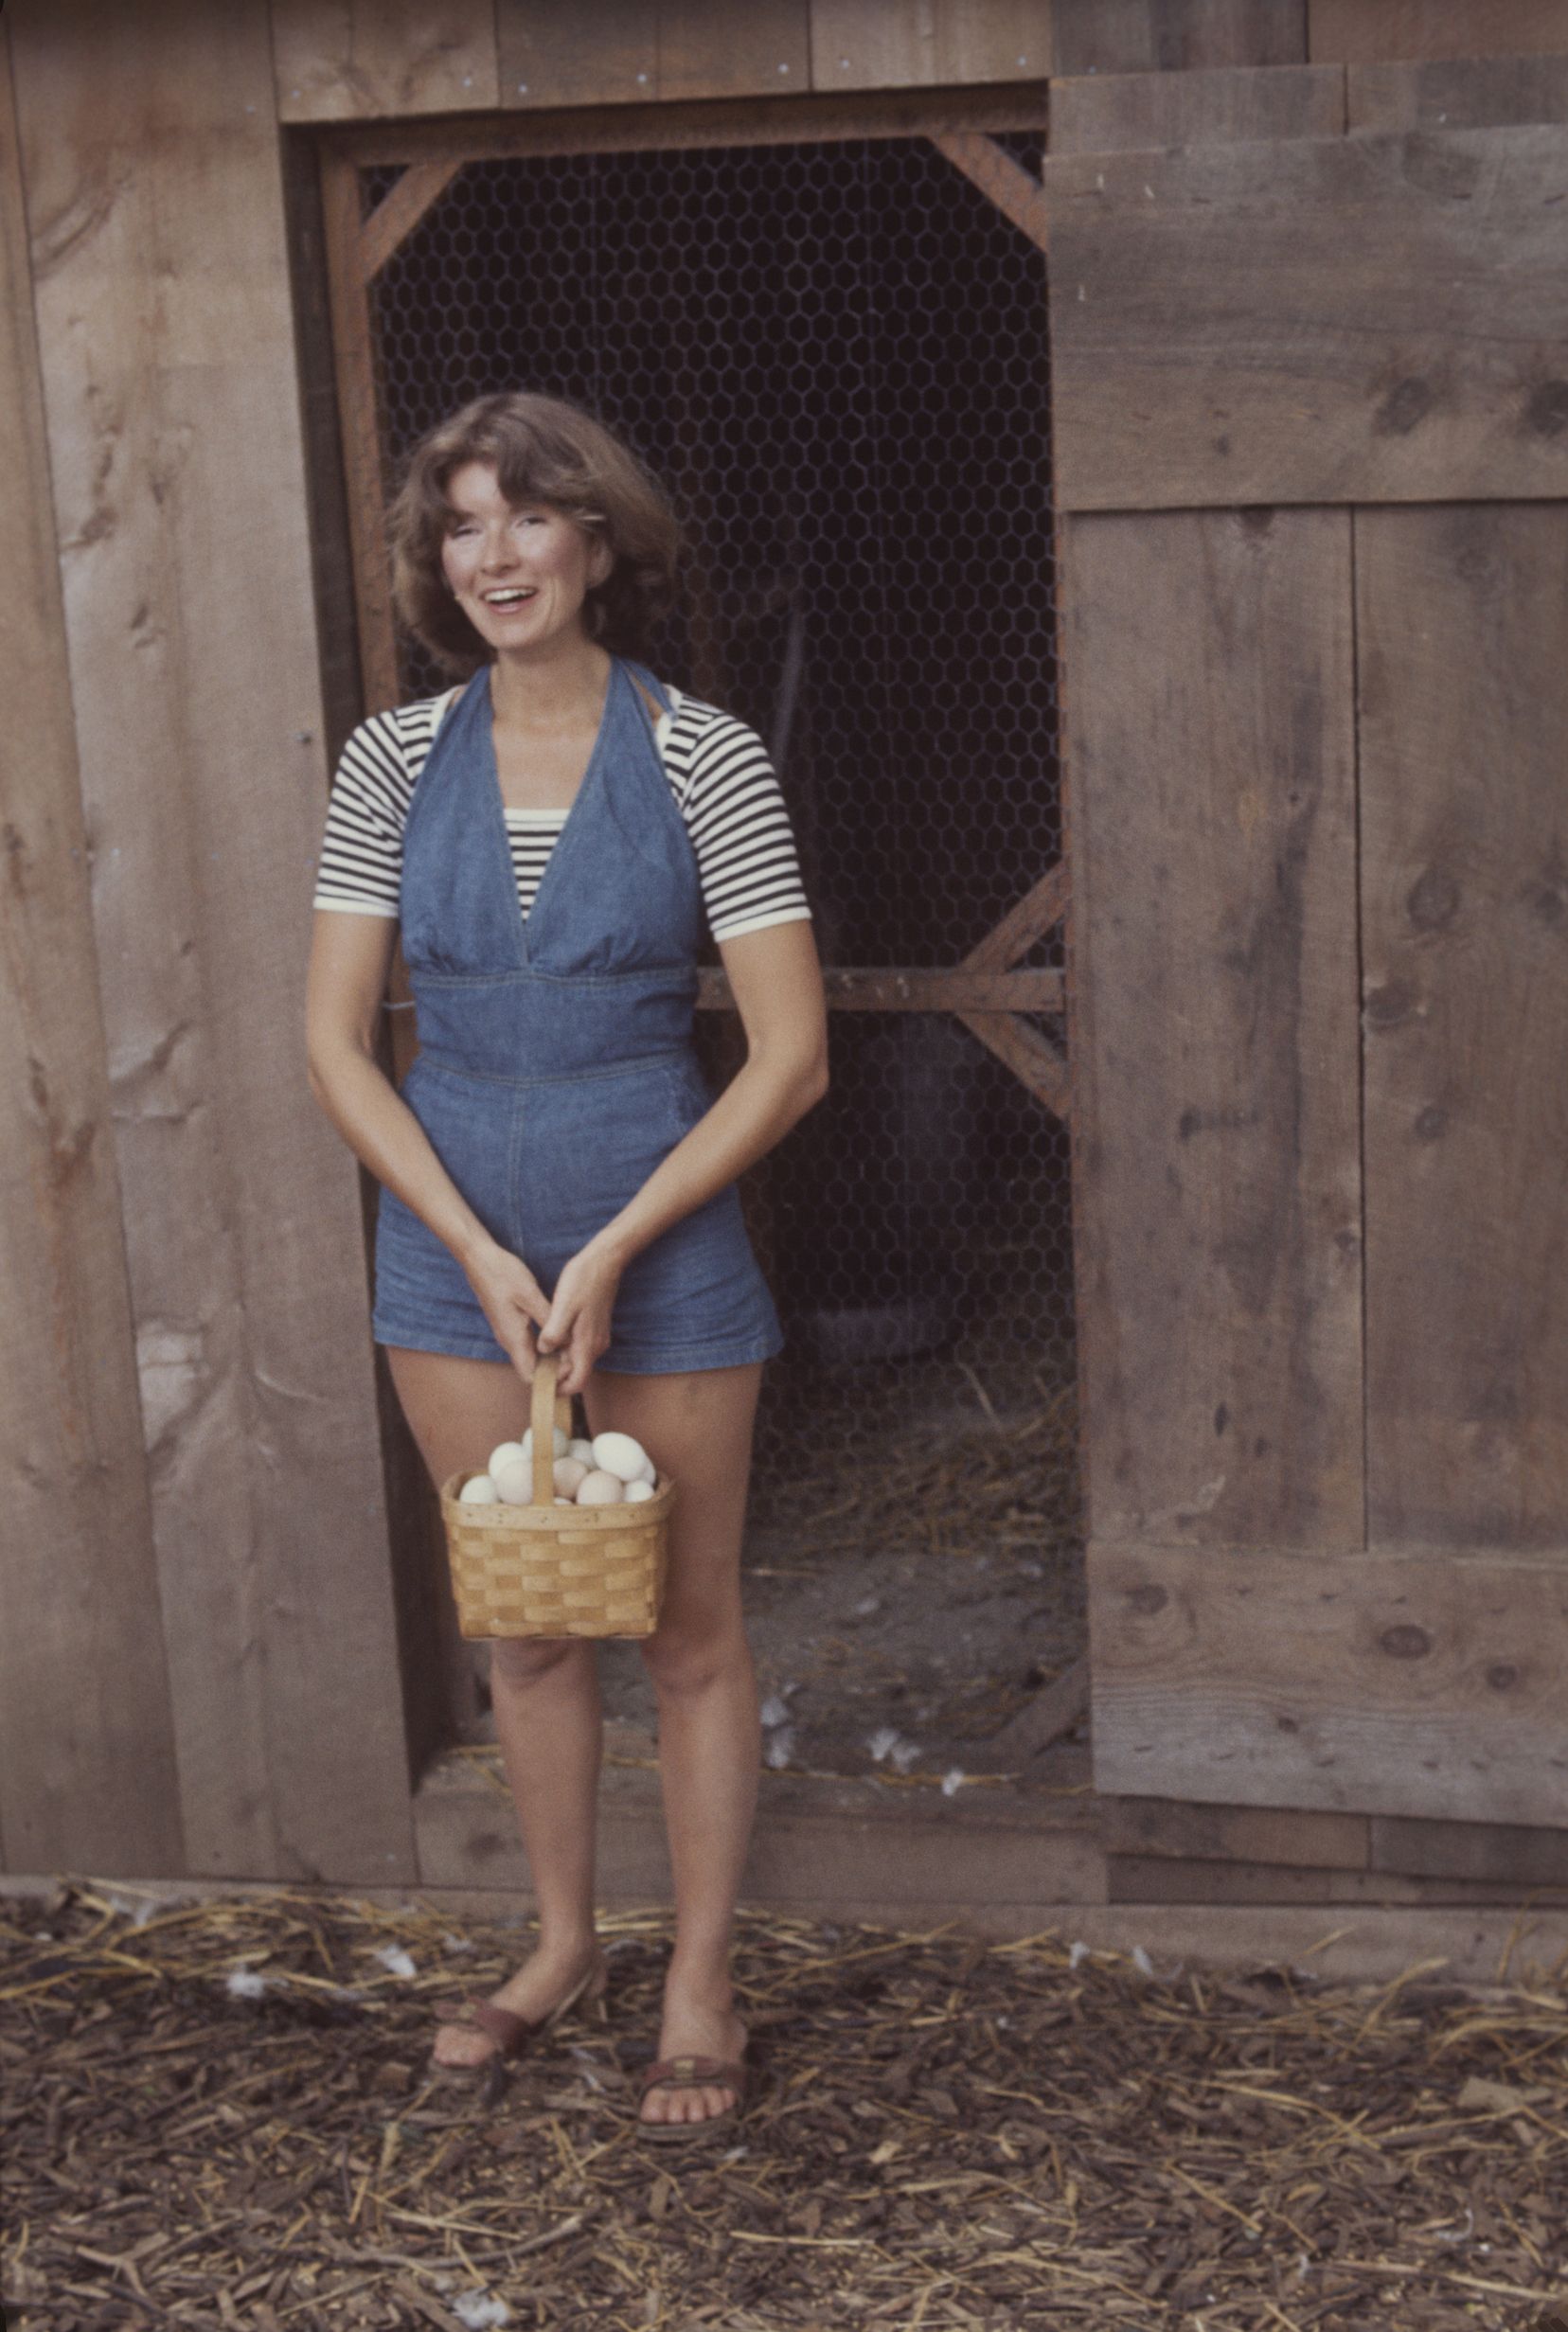 american businesswoman martha stewart carries a basket of eggs from a chicken coop on the grounds of her home,  westport, connecticut, august 1976 photo by susuan woodgetty images